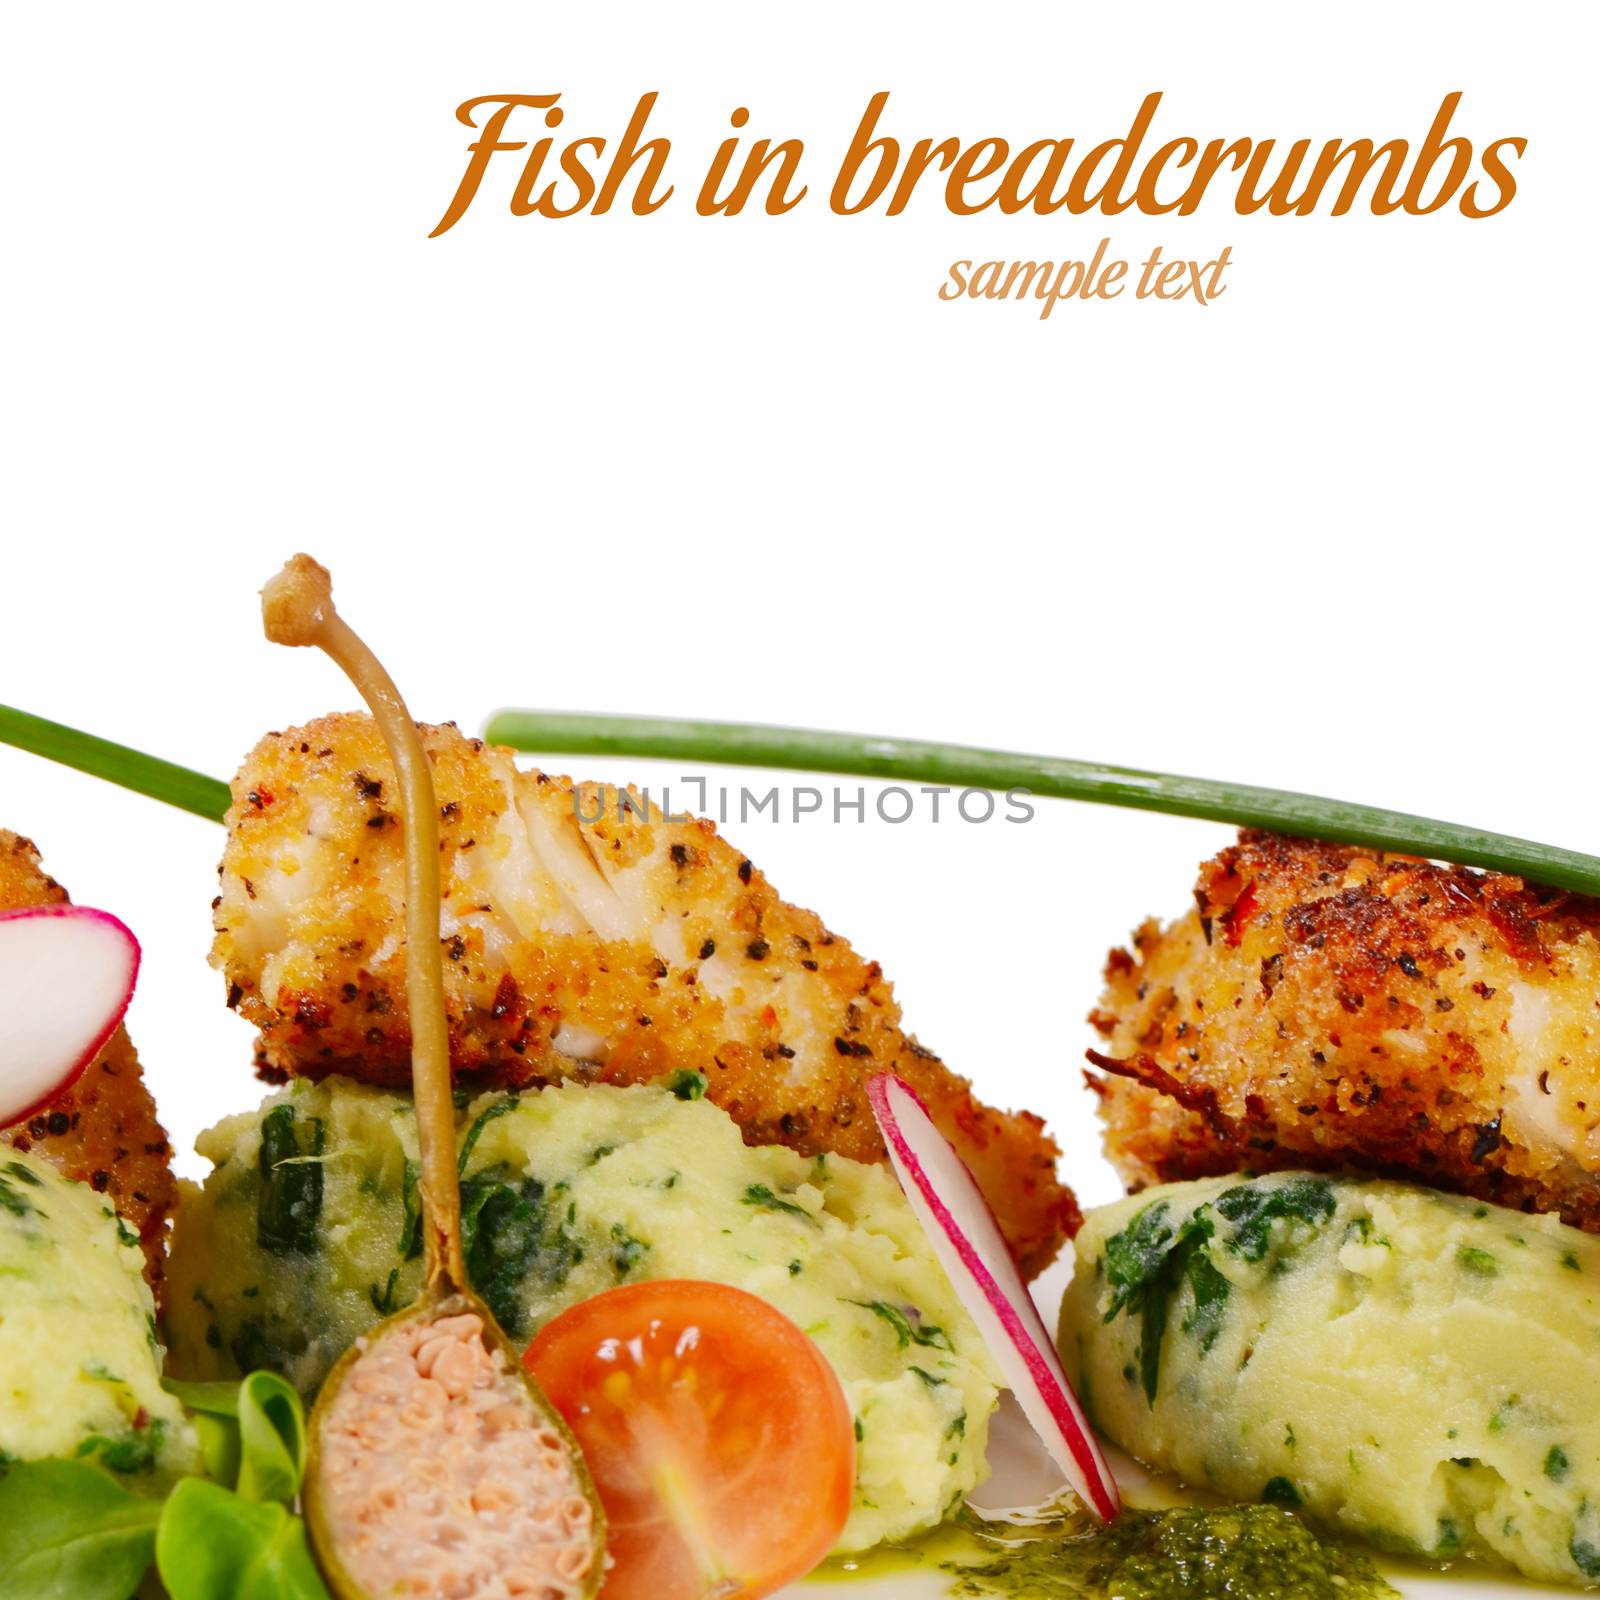 The fish in breadcrumbs with a mashed potatoes by SvetaVo